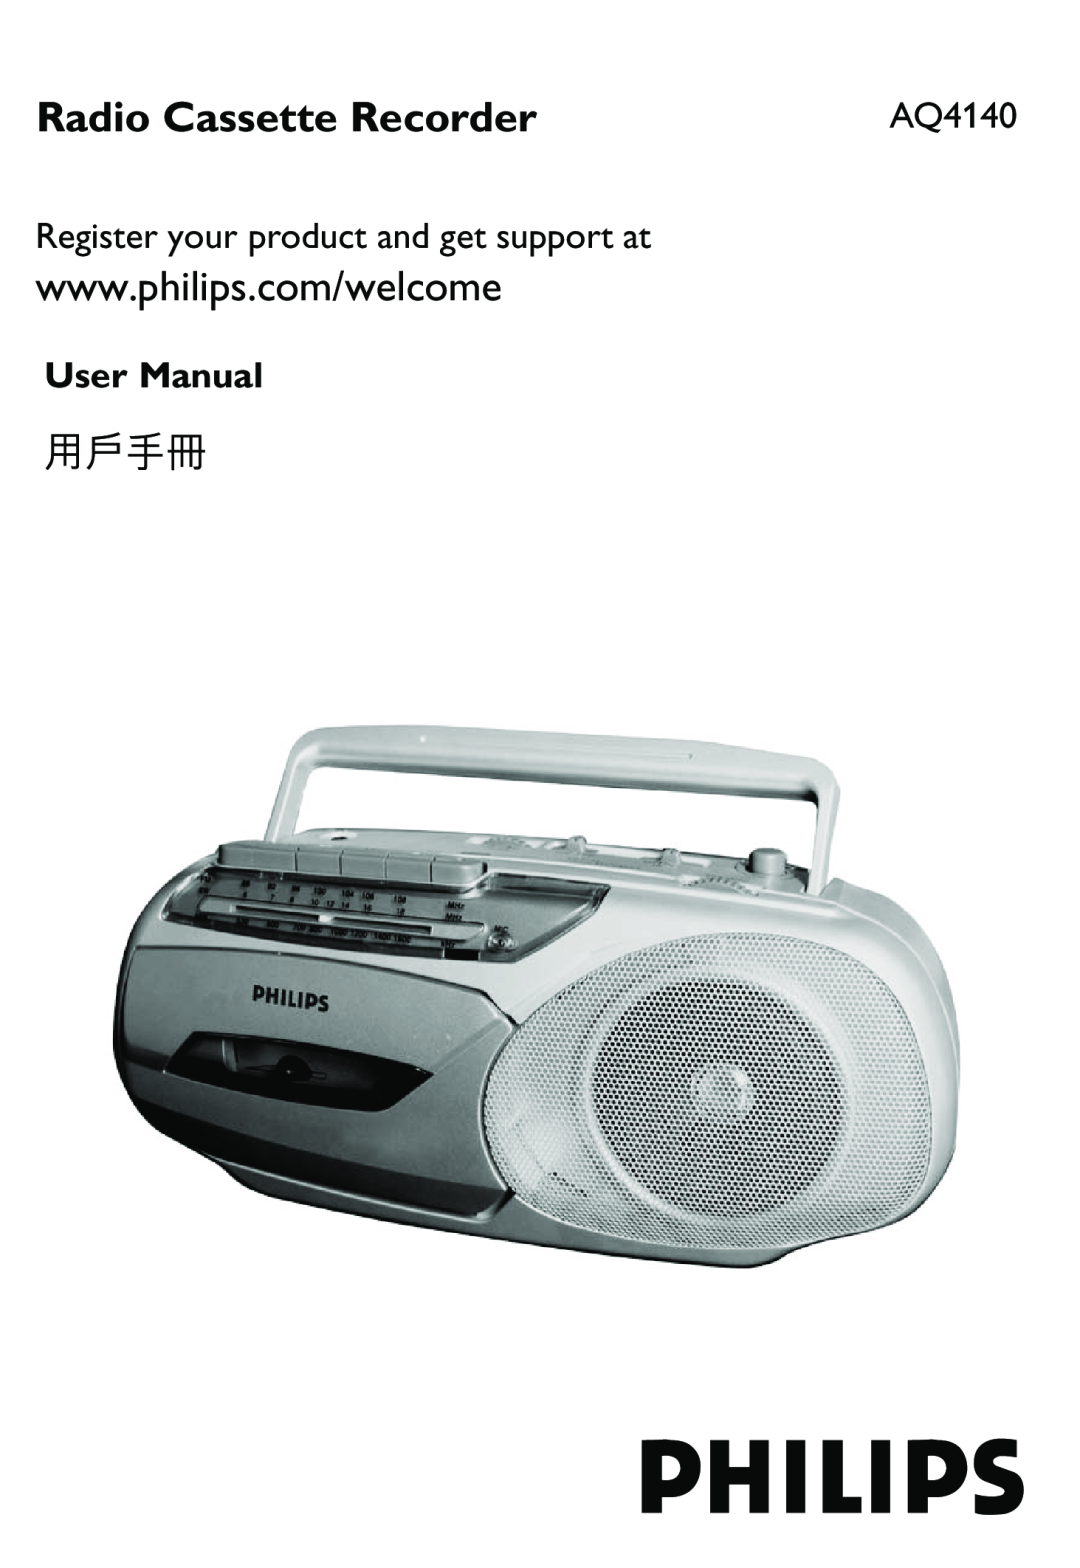 Philips AQ4140 user manual Radio Cassette Recorder, Register your product and get support at 